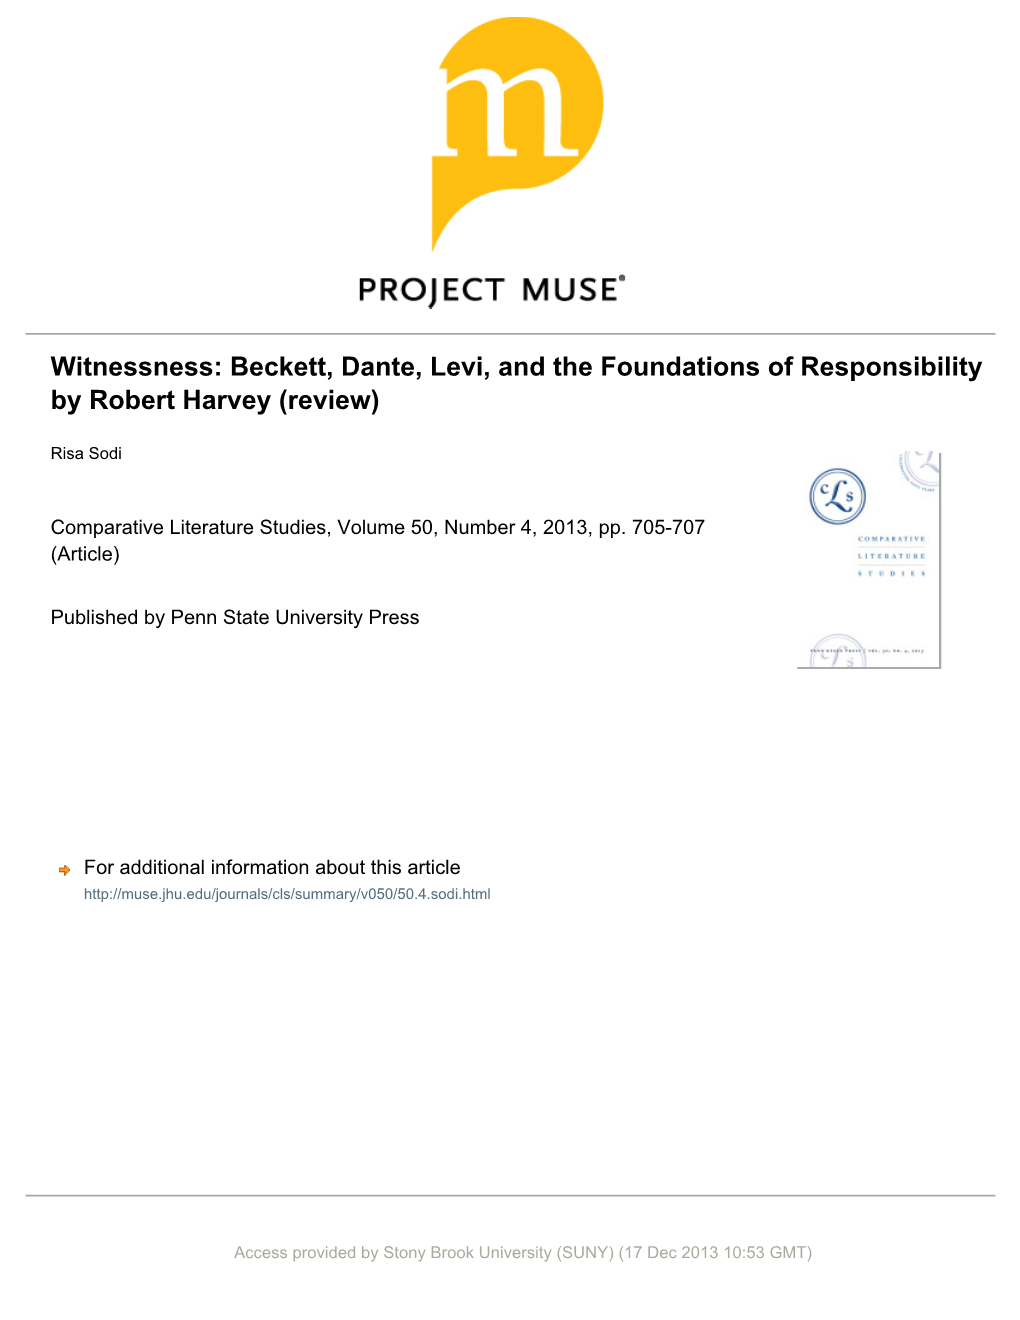 Witnessness: Beckett, Dante, Levi, and the Foundations of Responsibility by Robert Harvey (Review)